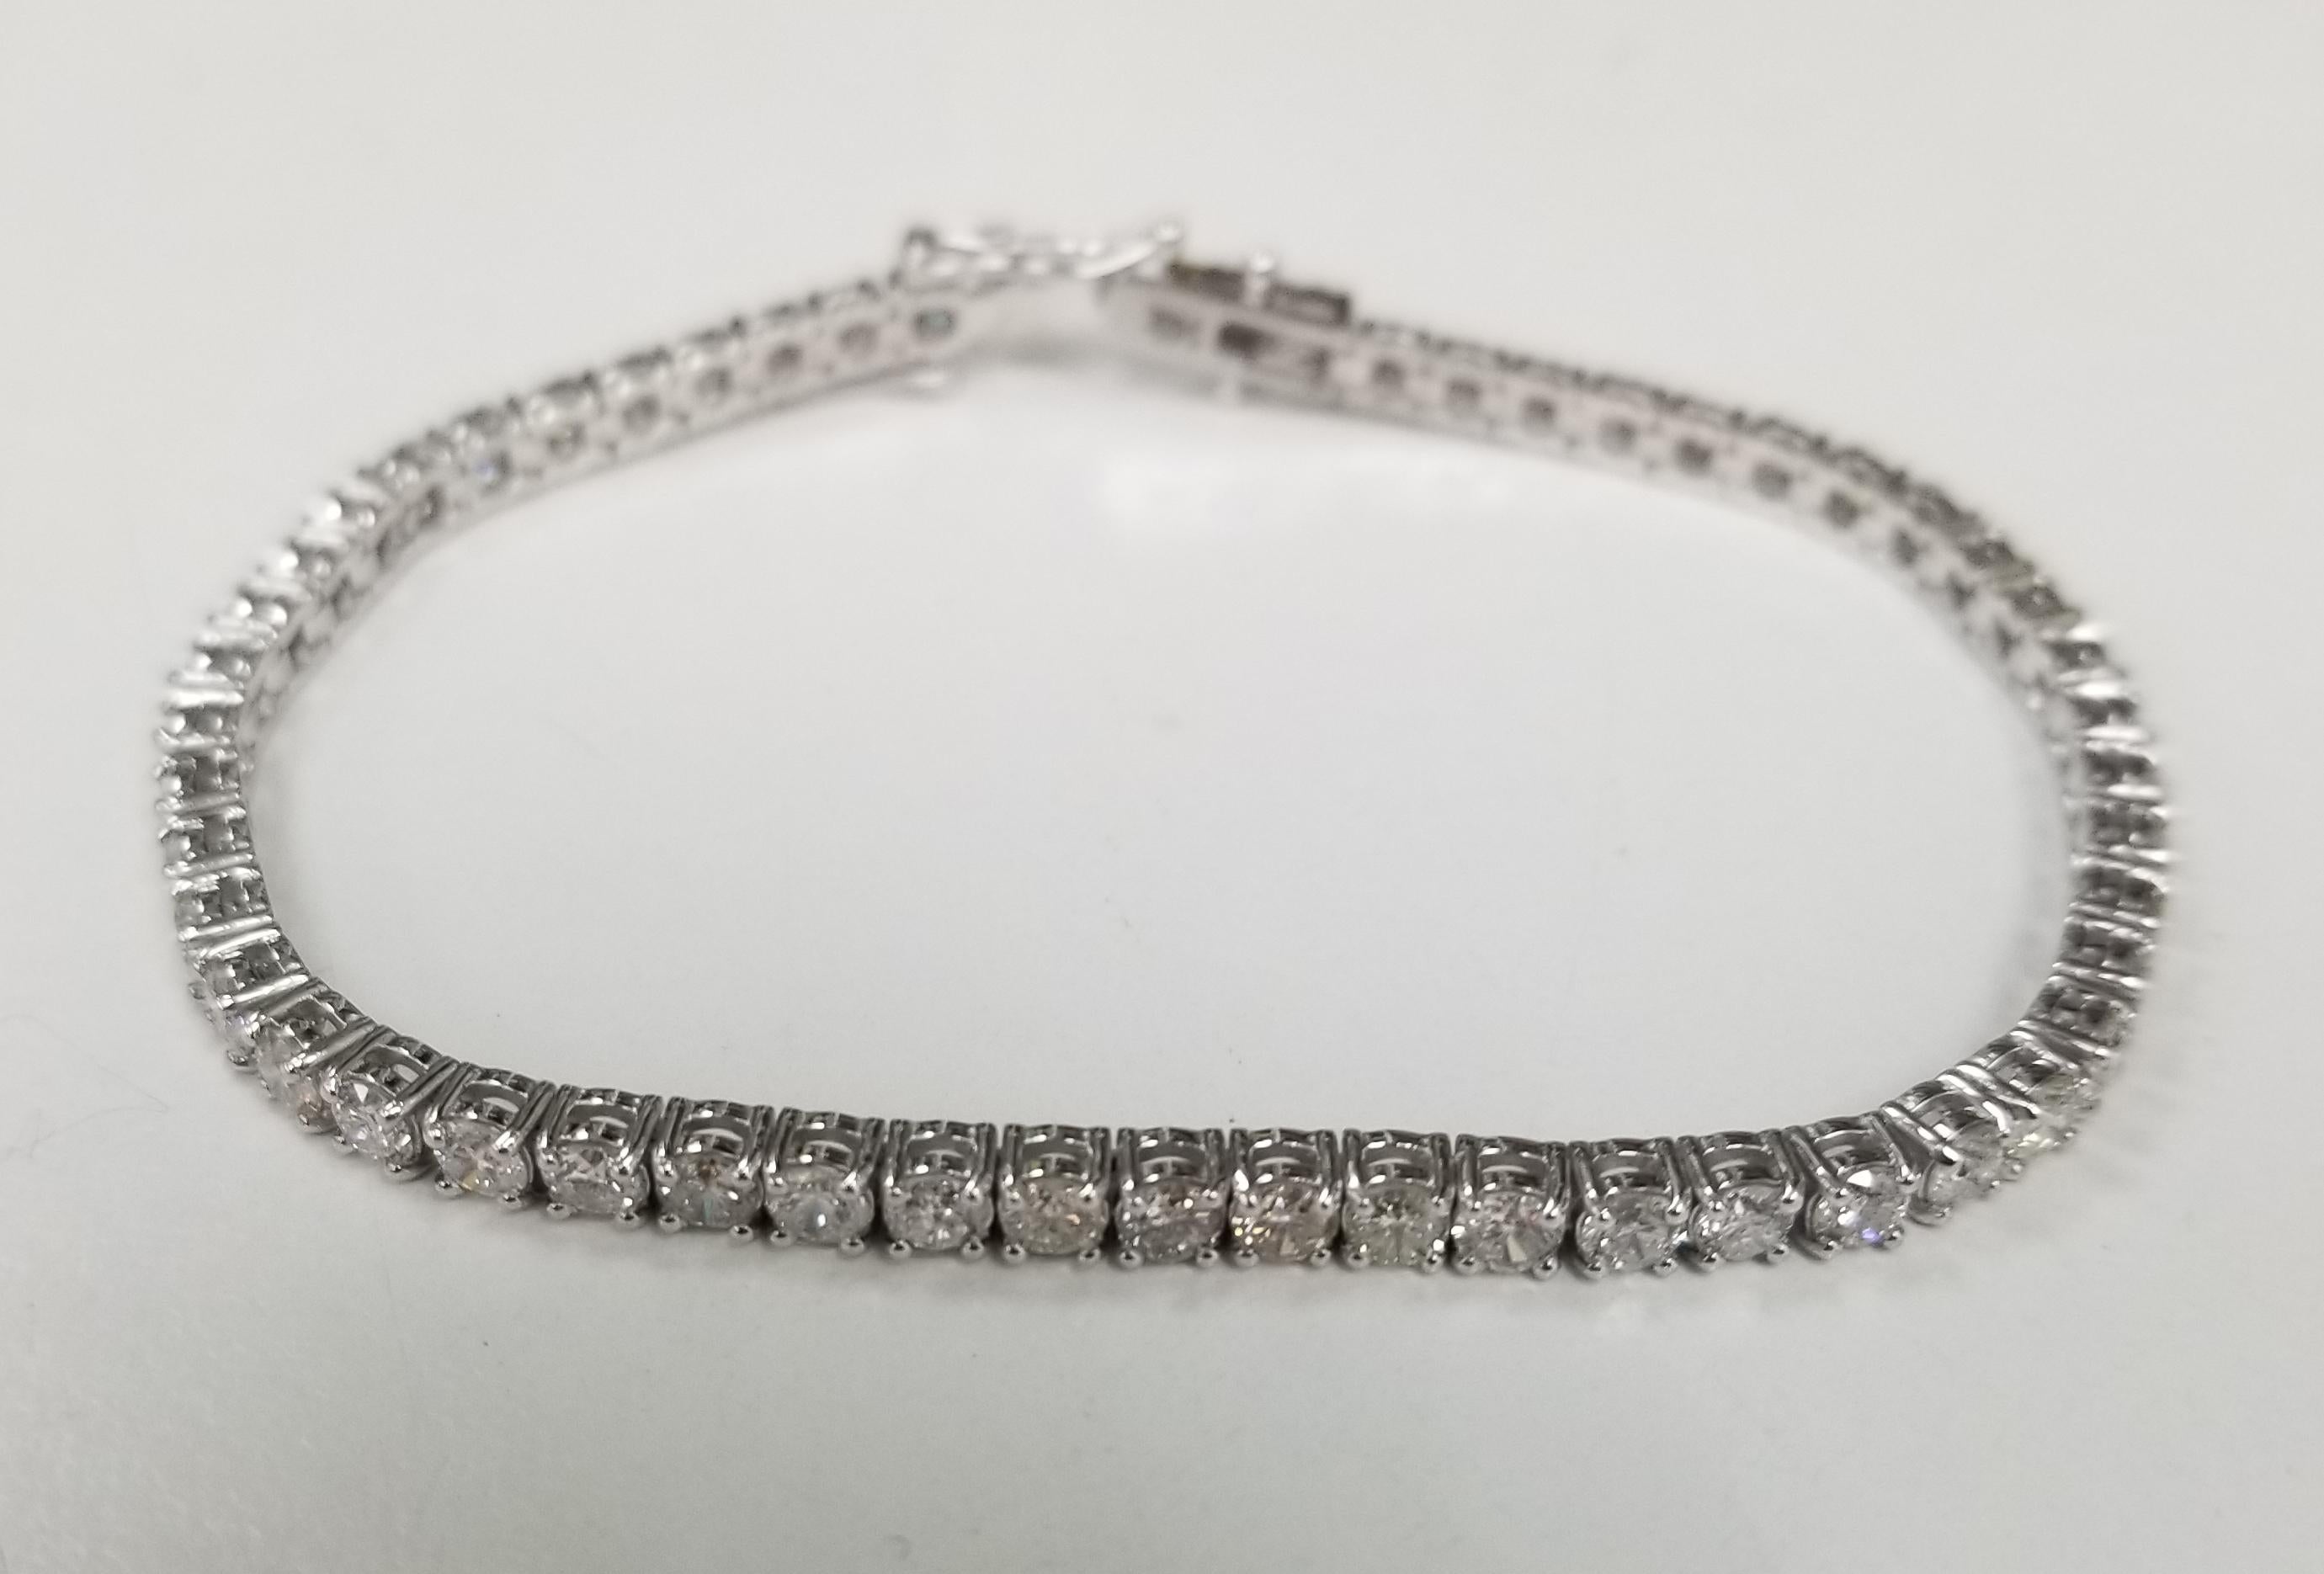  Specifications:
    DIAMOND: ROUND CUT DIAMOND
    carat total weight:  APPROX 5.29 CTW
    color: G
    clarity: VS2-SI1
    brand: custom
    metal: 14K WHITE gold
    type: TENNIS BRACELET
    weight: 15.4 grS
    SIZE: 7 INCH
    hallmark: